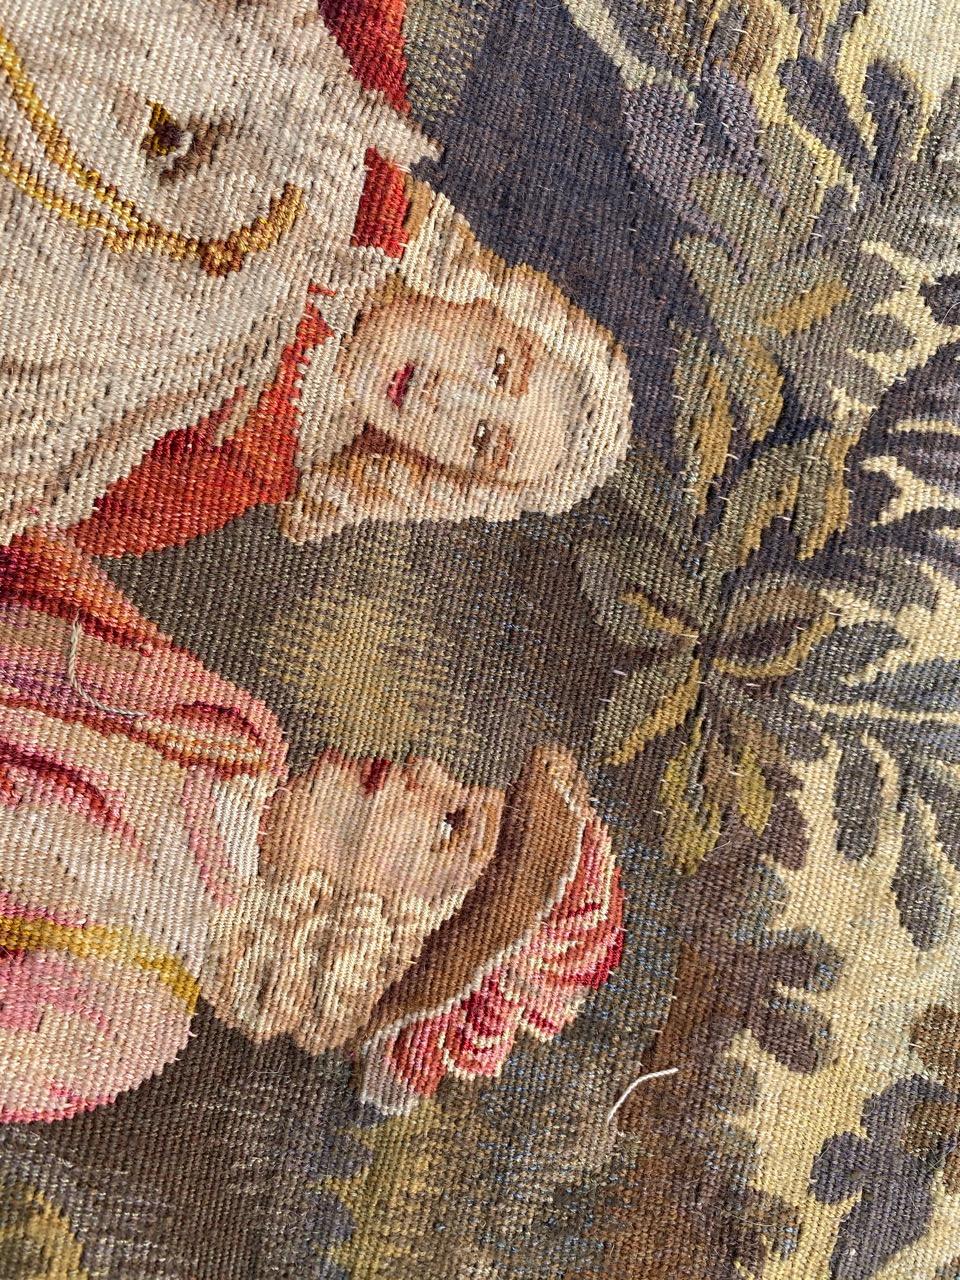 Bobyrug’s Wonderful Fine Antique French Aubusson Tapestry 2